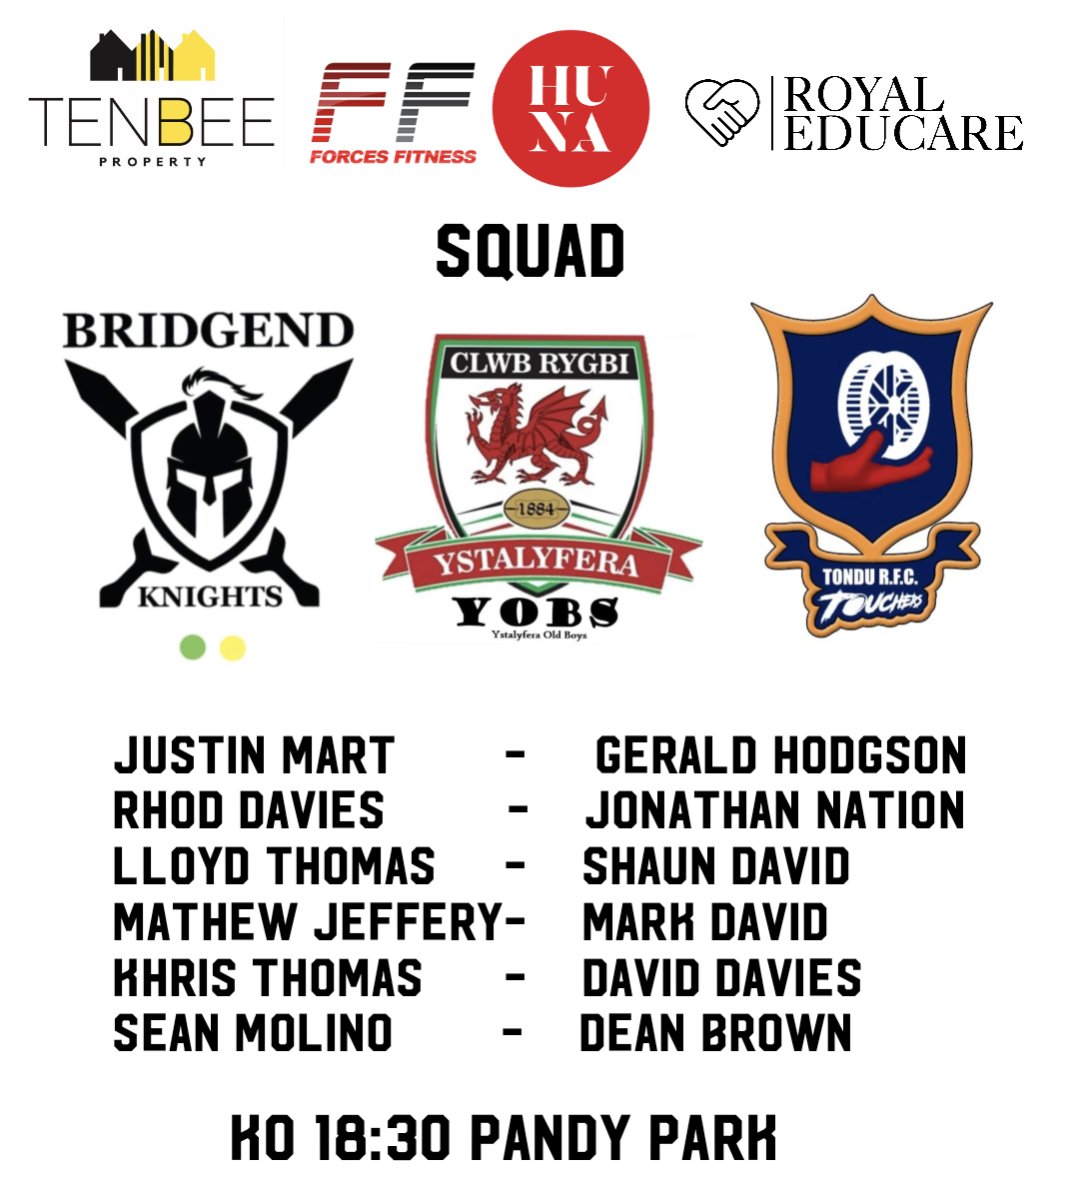 ⭐ Squad Update ⭐ 

Tonight  we make the short trip to our neighbours to play Tondu Touchers & Ystalyfera OBS. 

Huge thanks to our sponsors for supporting our team!

#Bridgendrugby #Rugbybridgend #Bridgend #welshrugby #RugbyWales #Bridgend #uppaknights